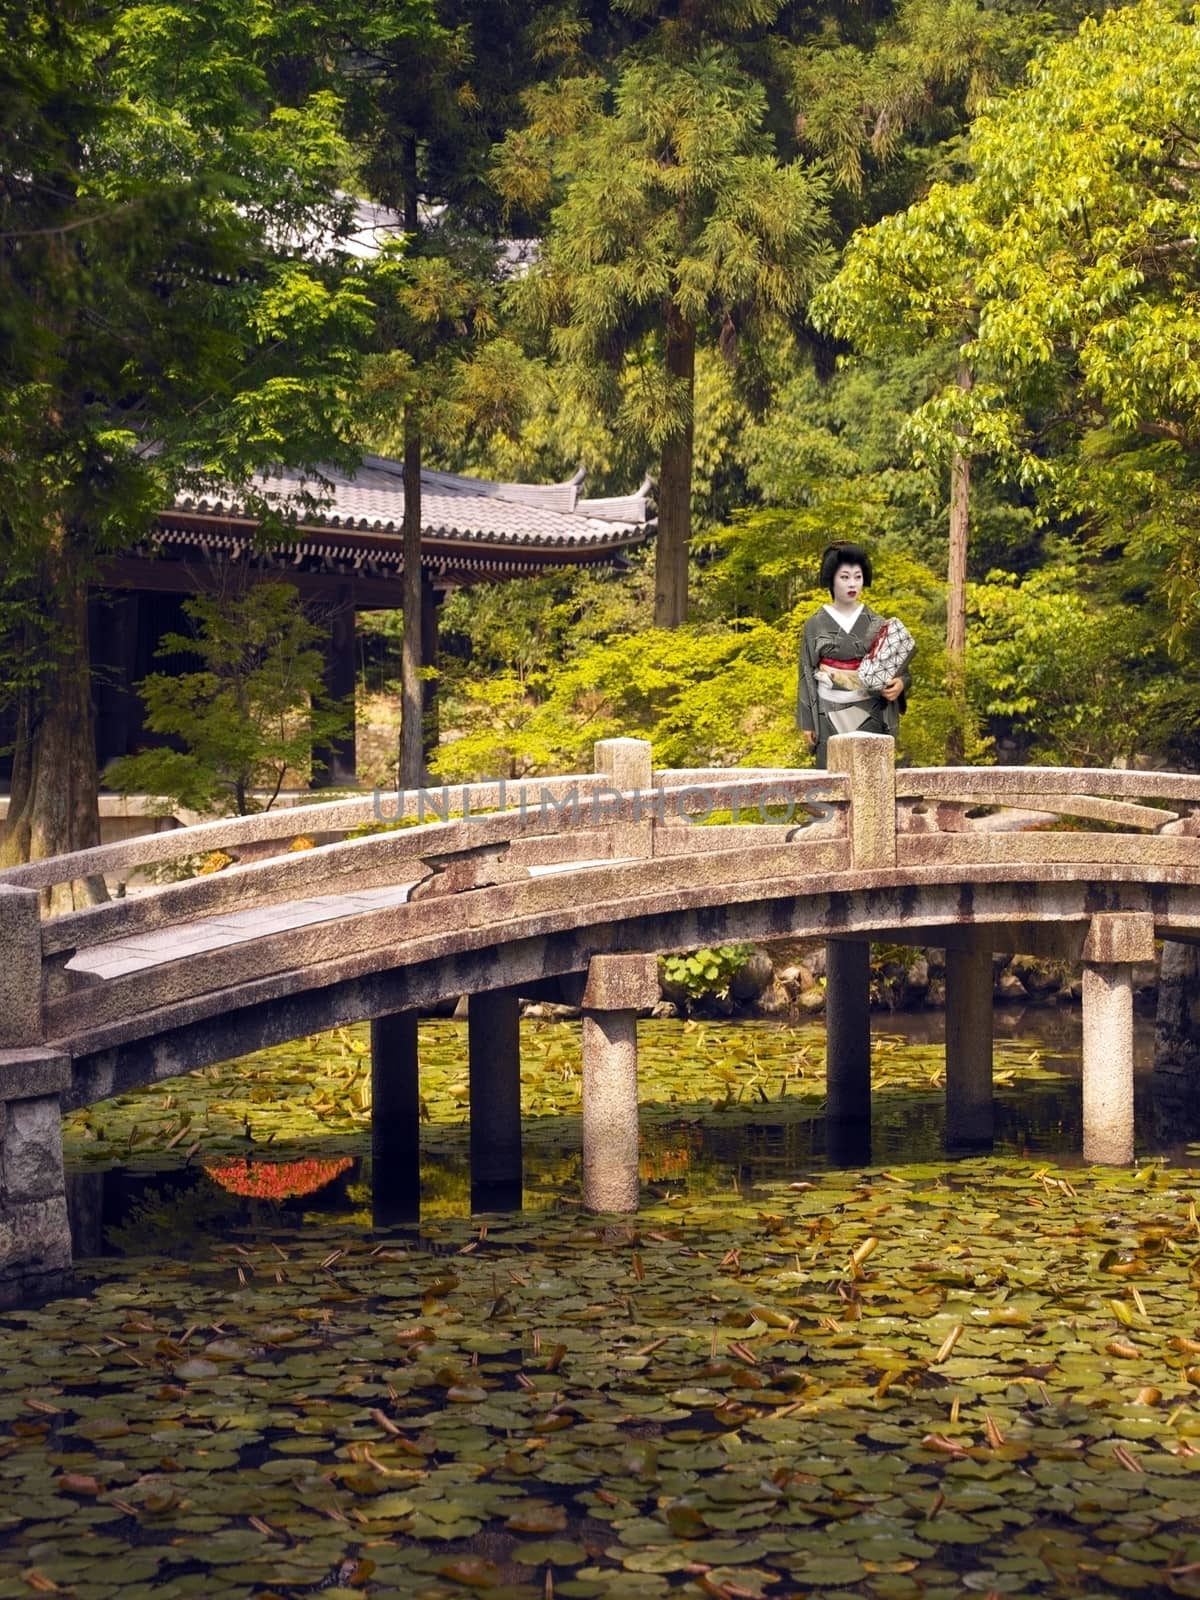 A Japanese Geisha standing on an ornamental bridge in the gardens of Chion-in Temple in the city of Kyoto, Japan.